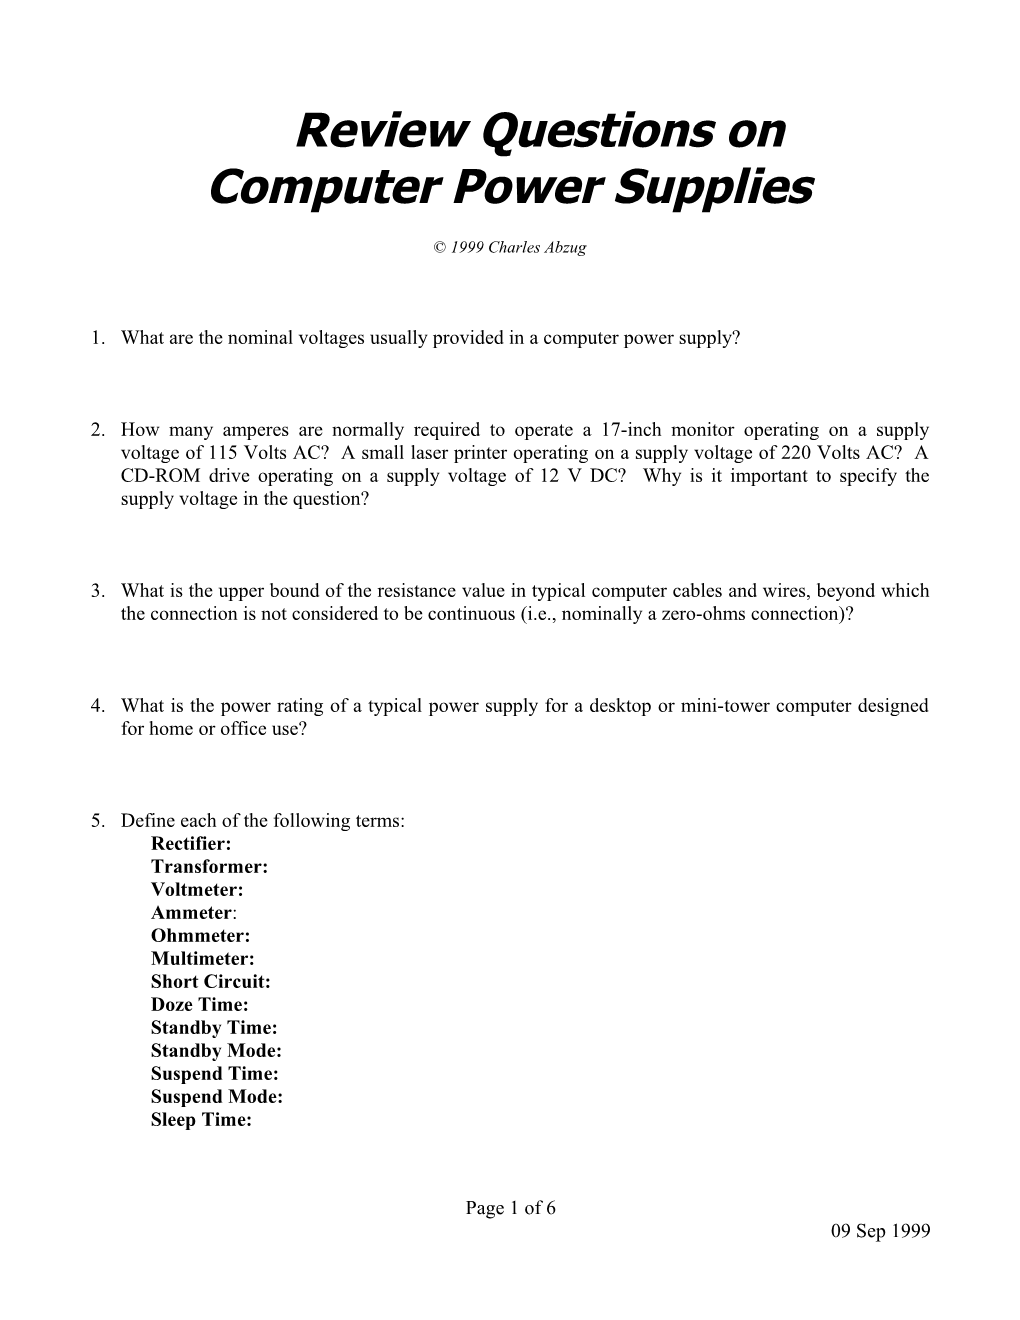 Review Questions on Computer Power Supplies